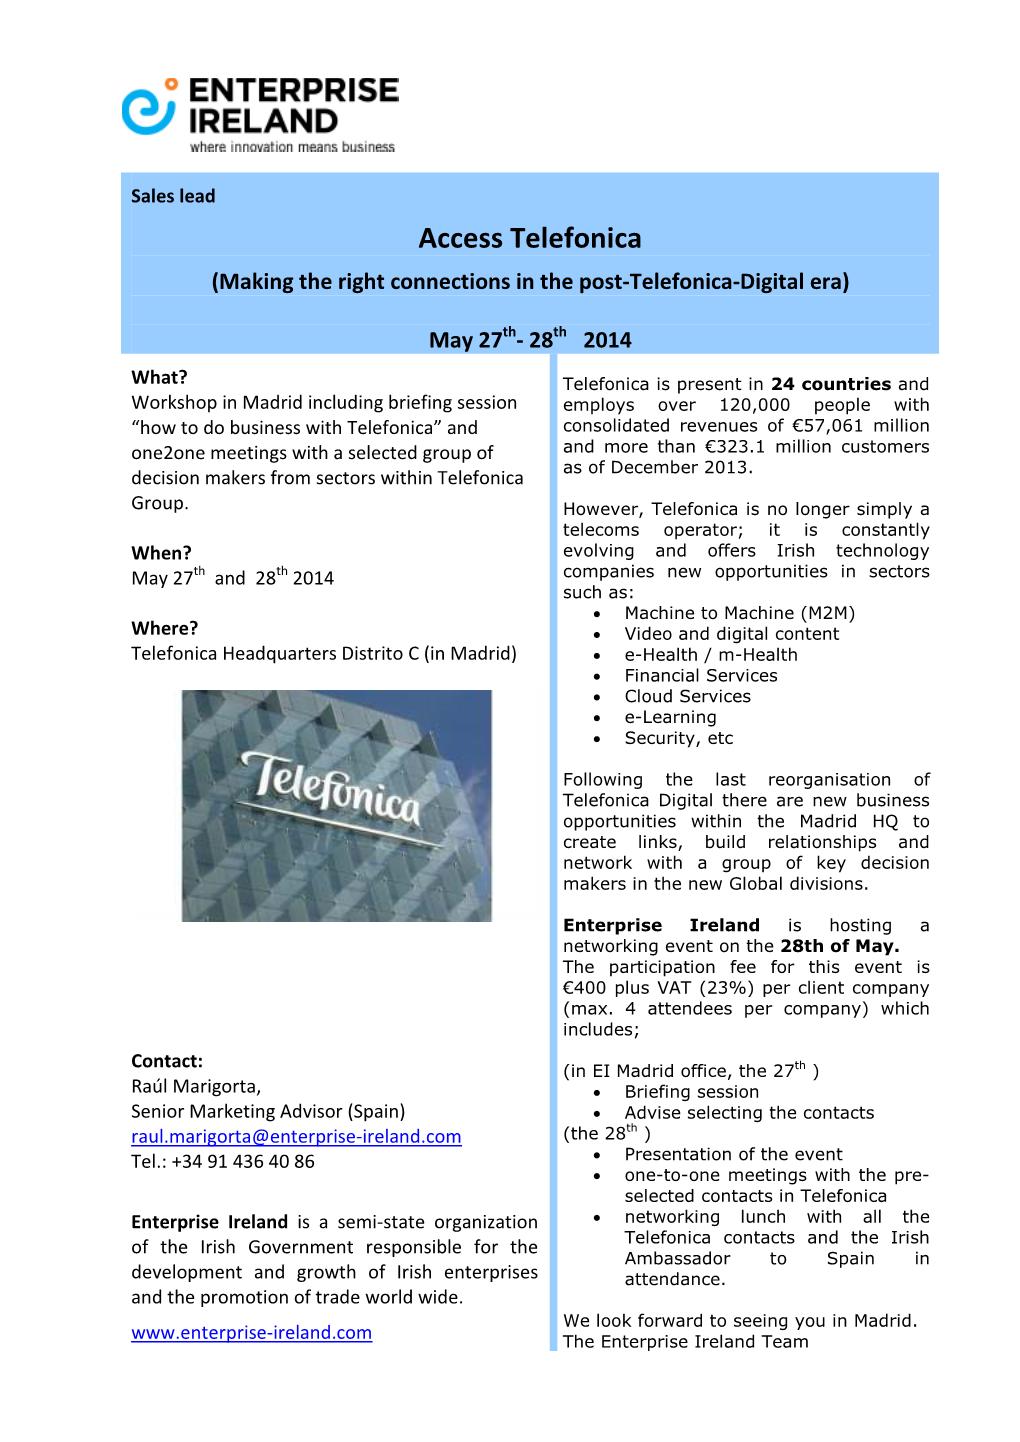 Access Telefonica (Making the Right Connections in the Post-Telefonica-Digital Era)